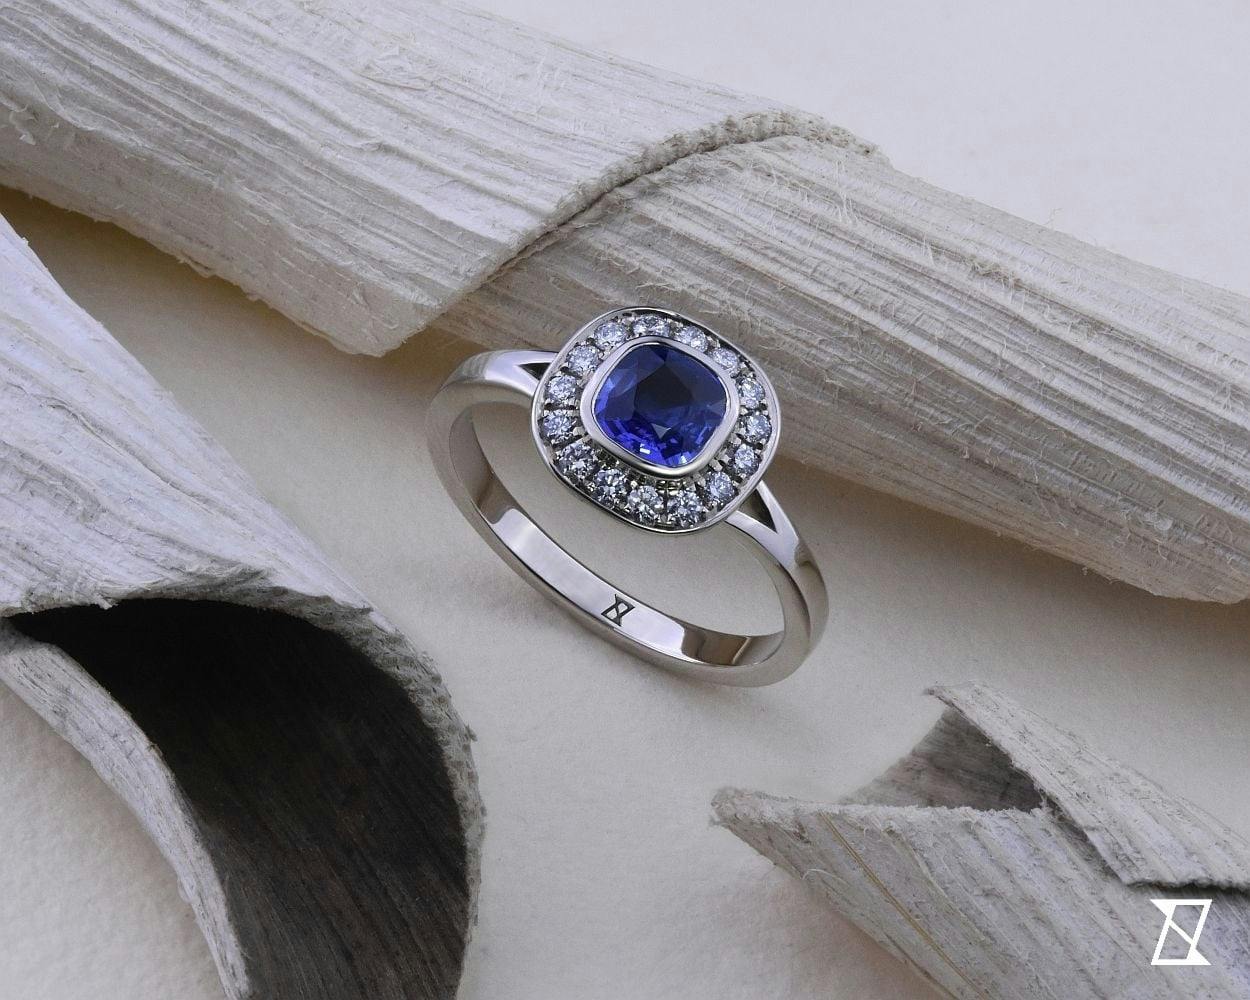 Cushion cut sapphire with diamond halo in white 14k gold.